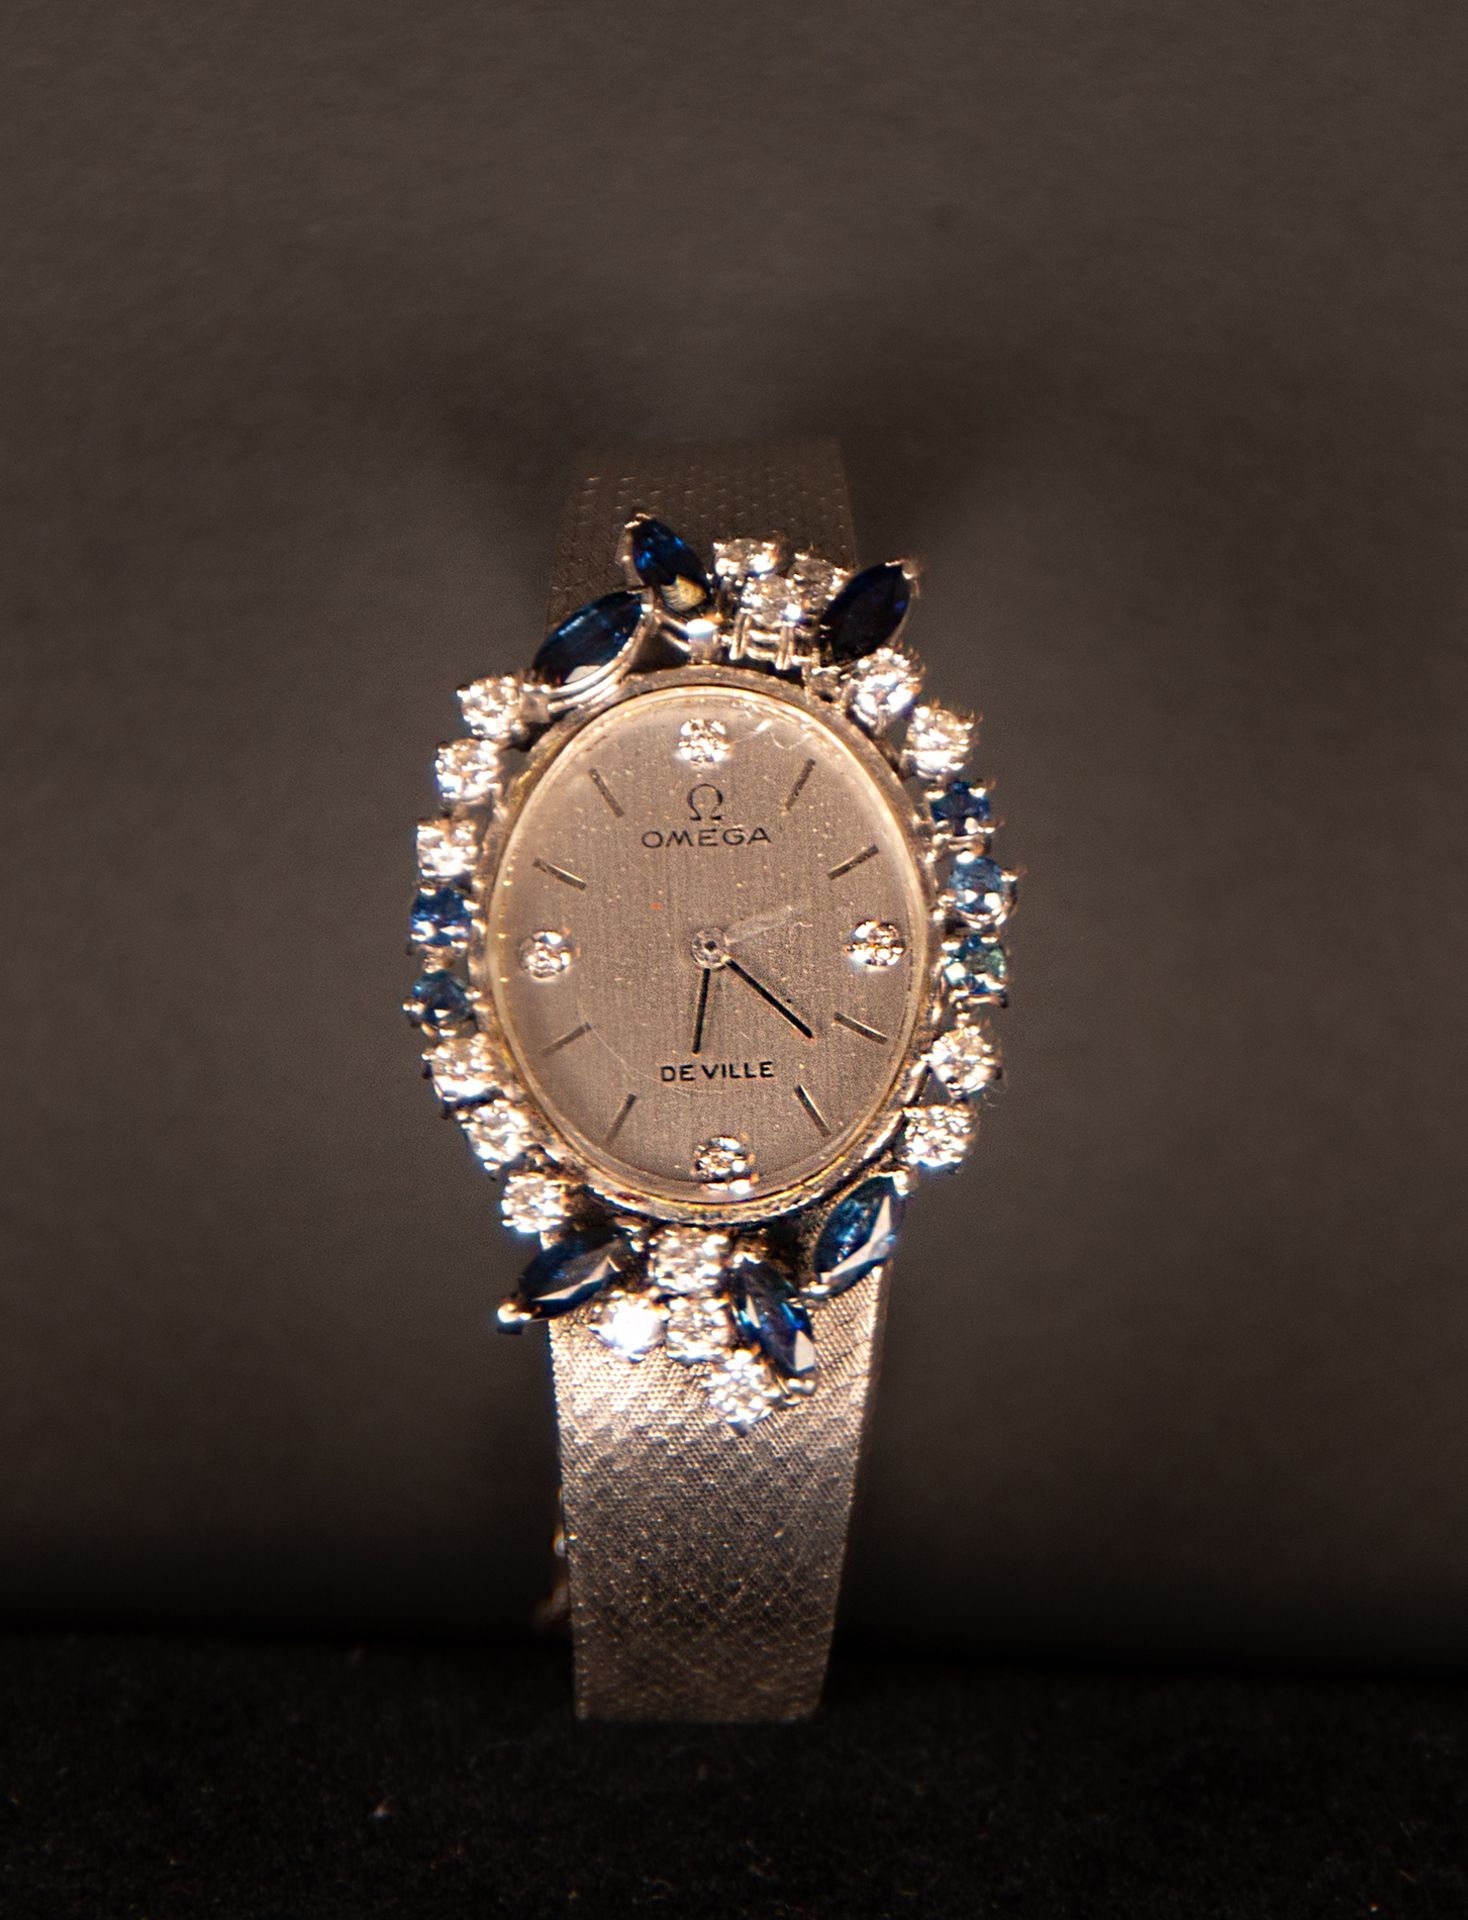 Omega  ladies watch in white gold, sapphires and diamonds, 1950s - Image 2 of 6